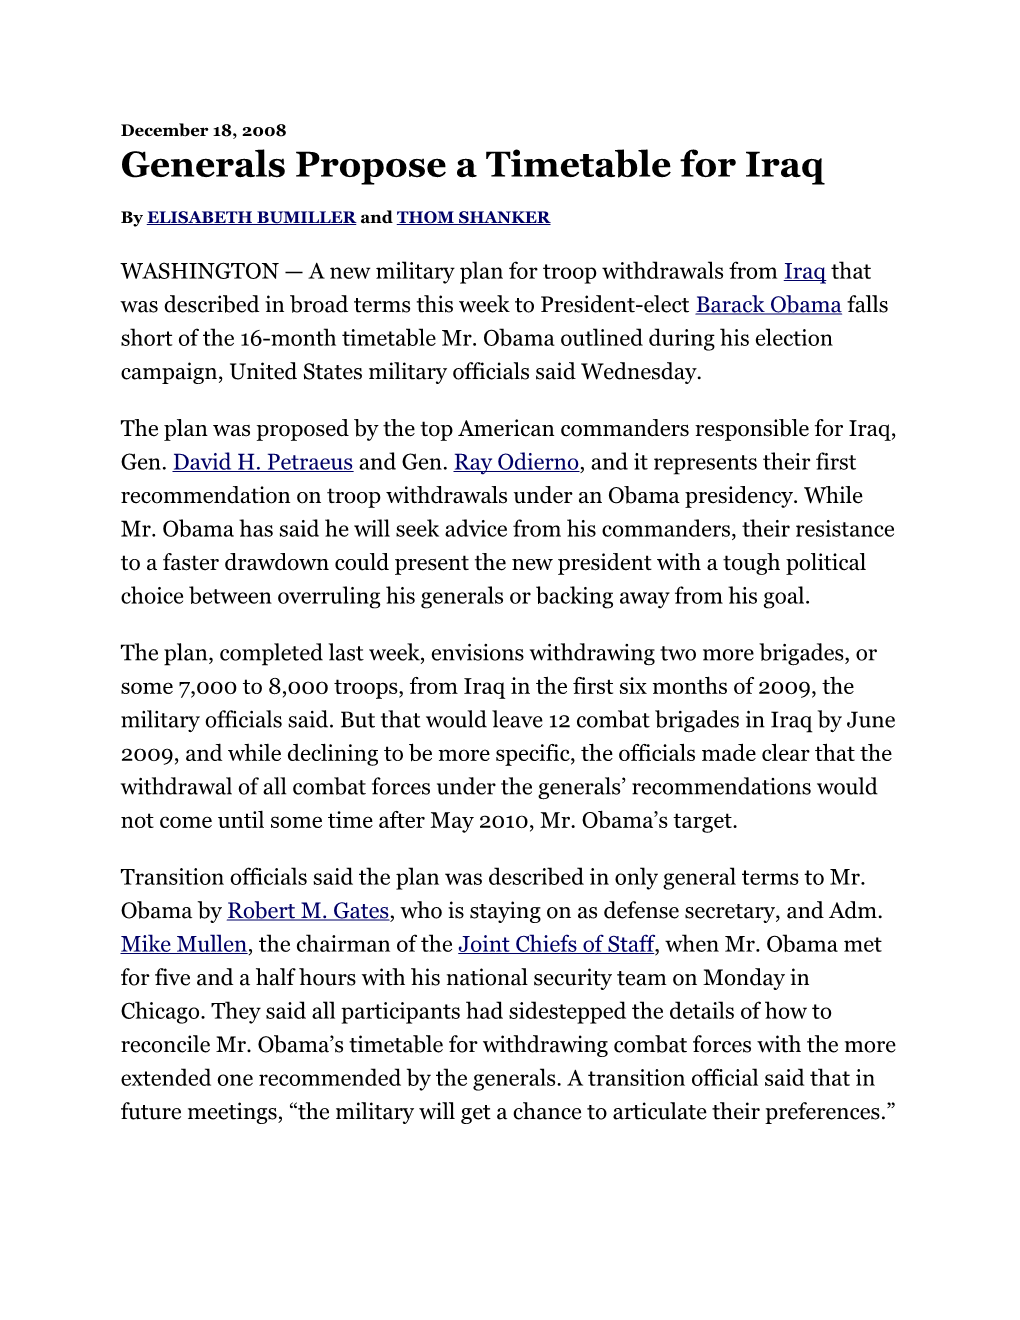 Generals Propose a Timetable for Iraq